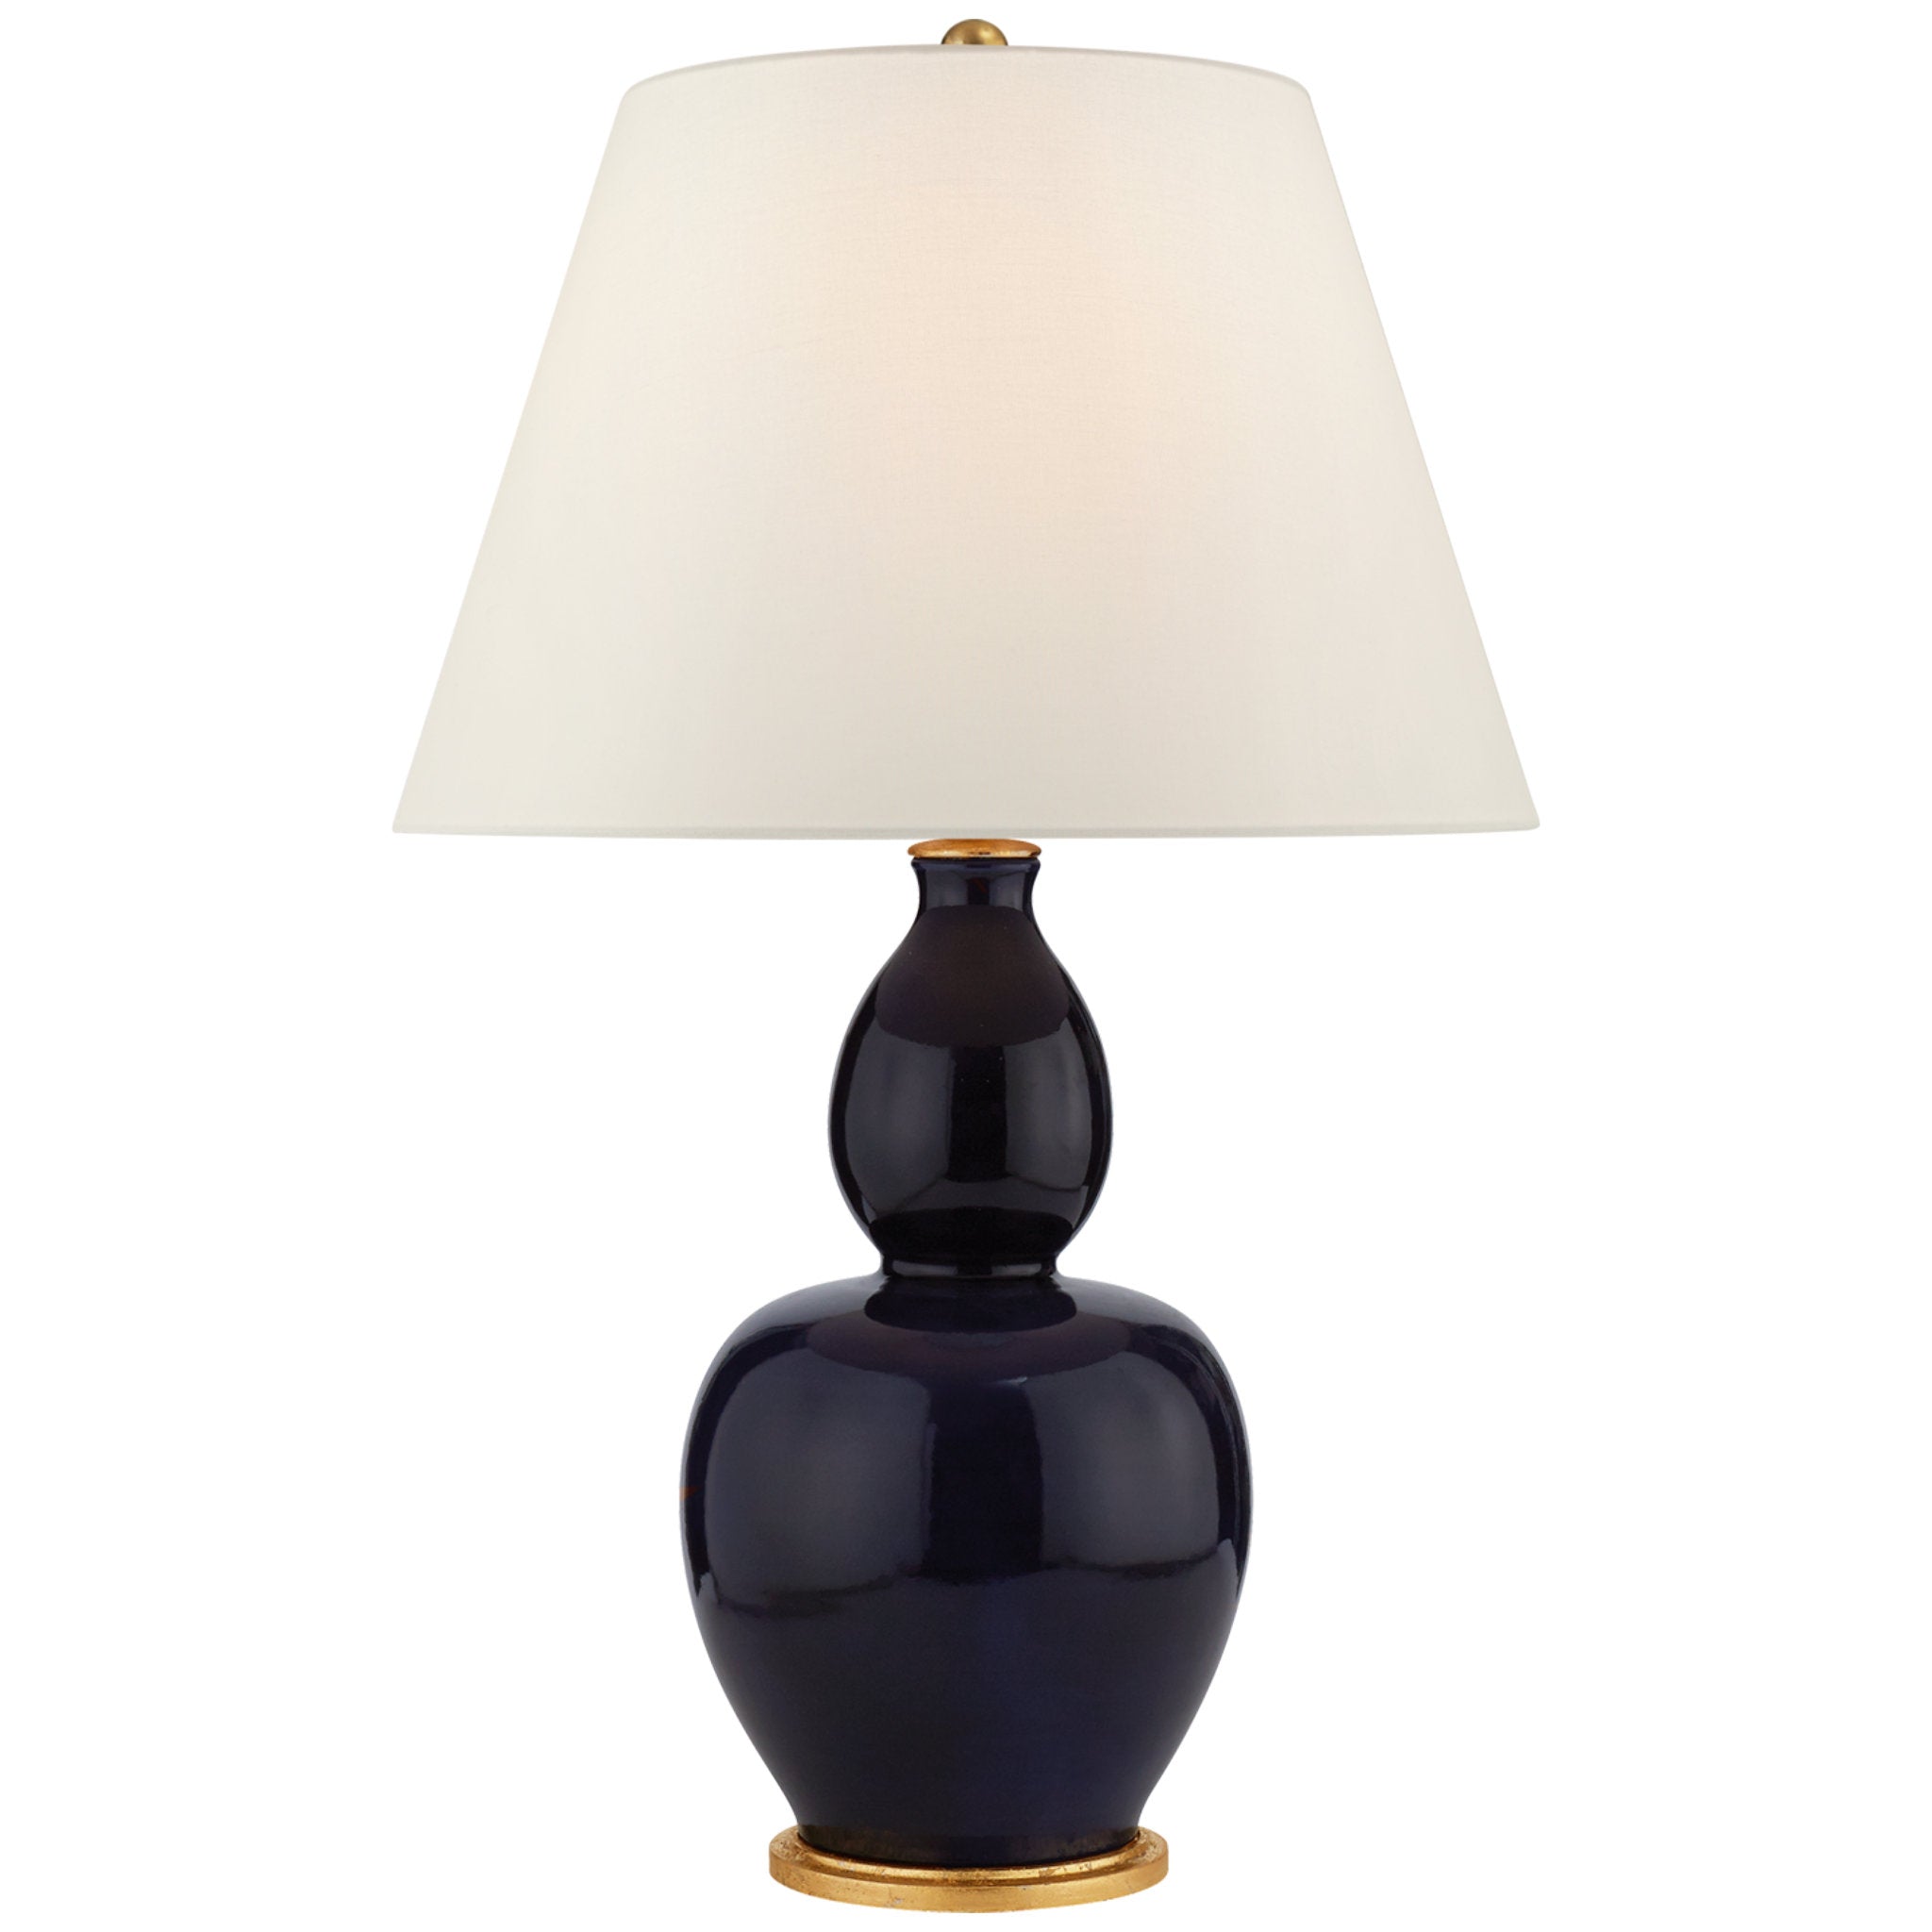 Chapman & Myers Yue Double Gourd Table Lamp in Denim with Linen Shade